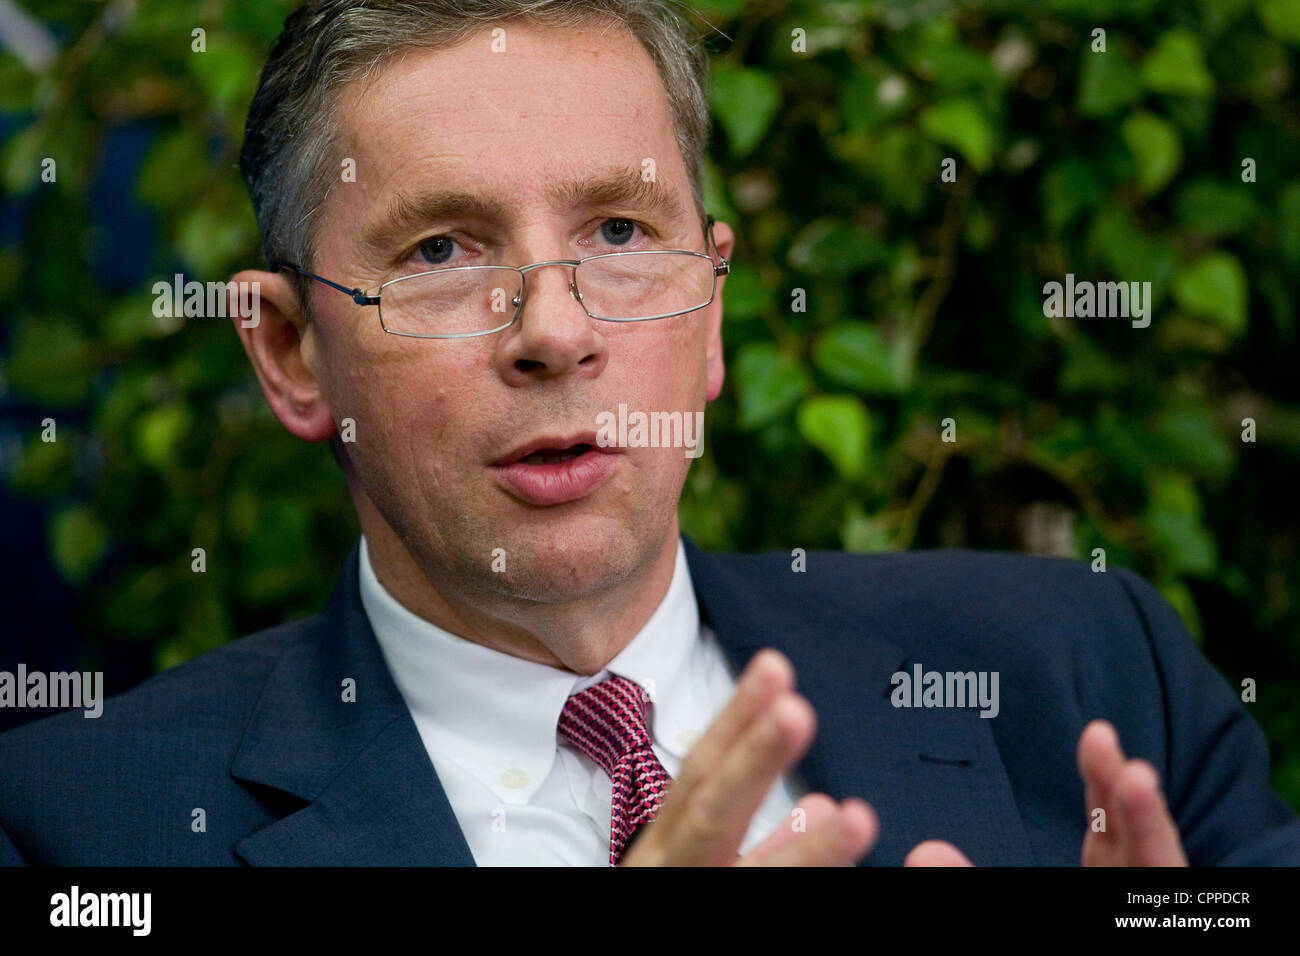 Klaus Kleinfeld, chairman and CEO of Alcoa Inc. Stock Photo